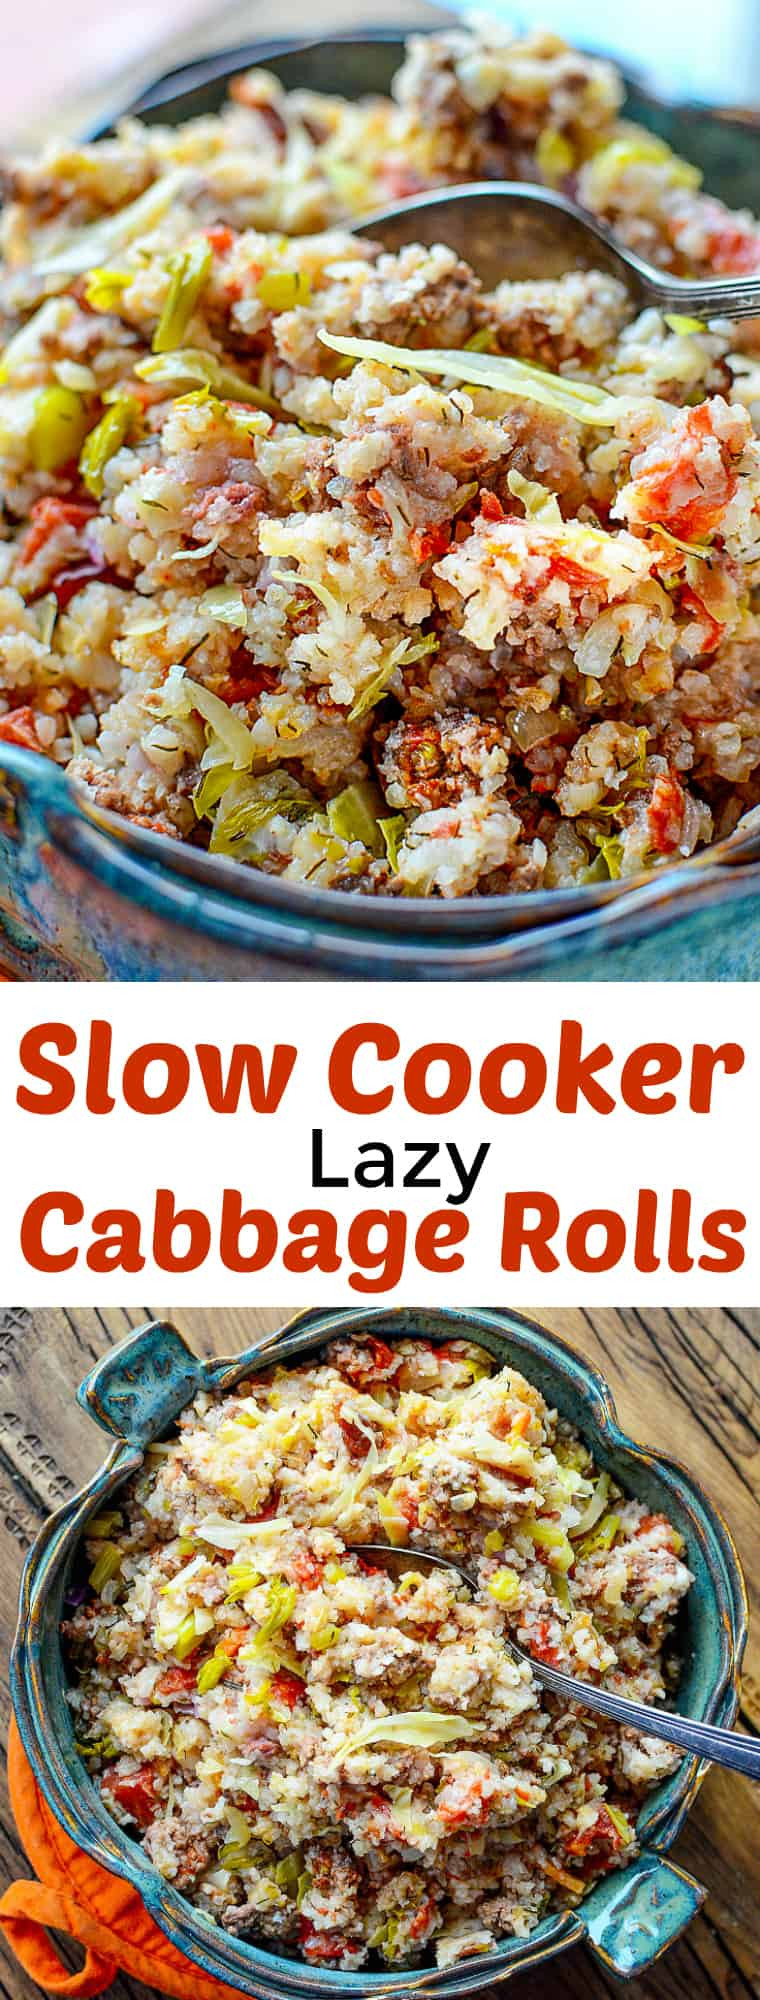 Slow Cooker Cabbage Rolls
 Slow Cooker Lazy Cabbage Rolls